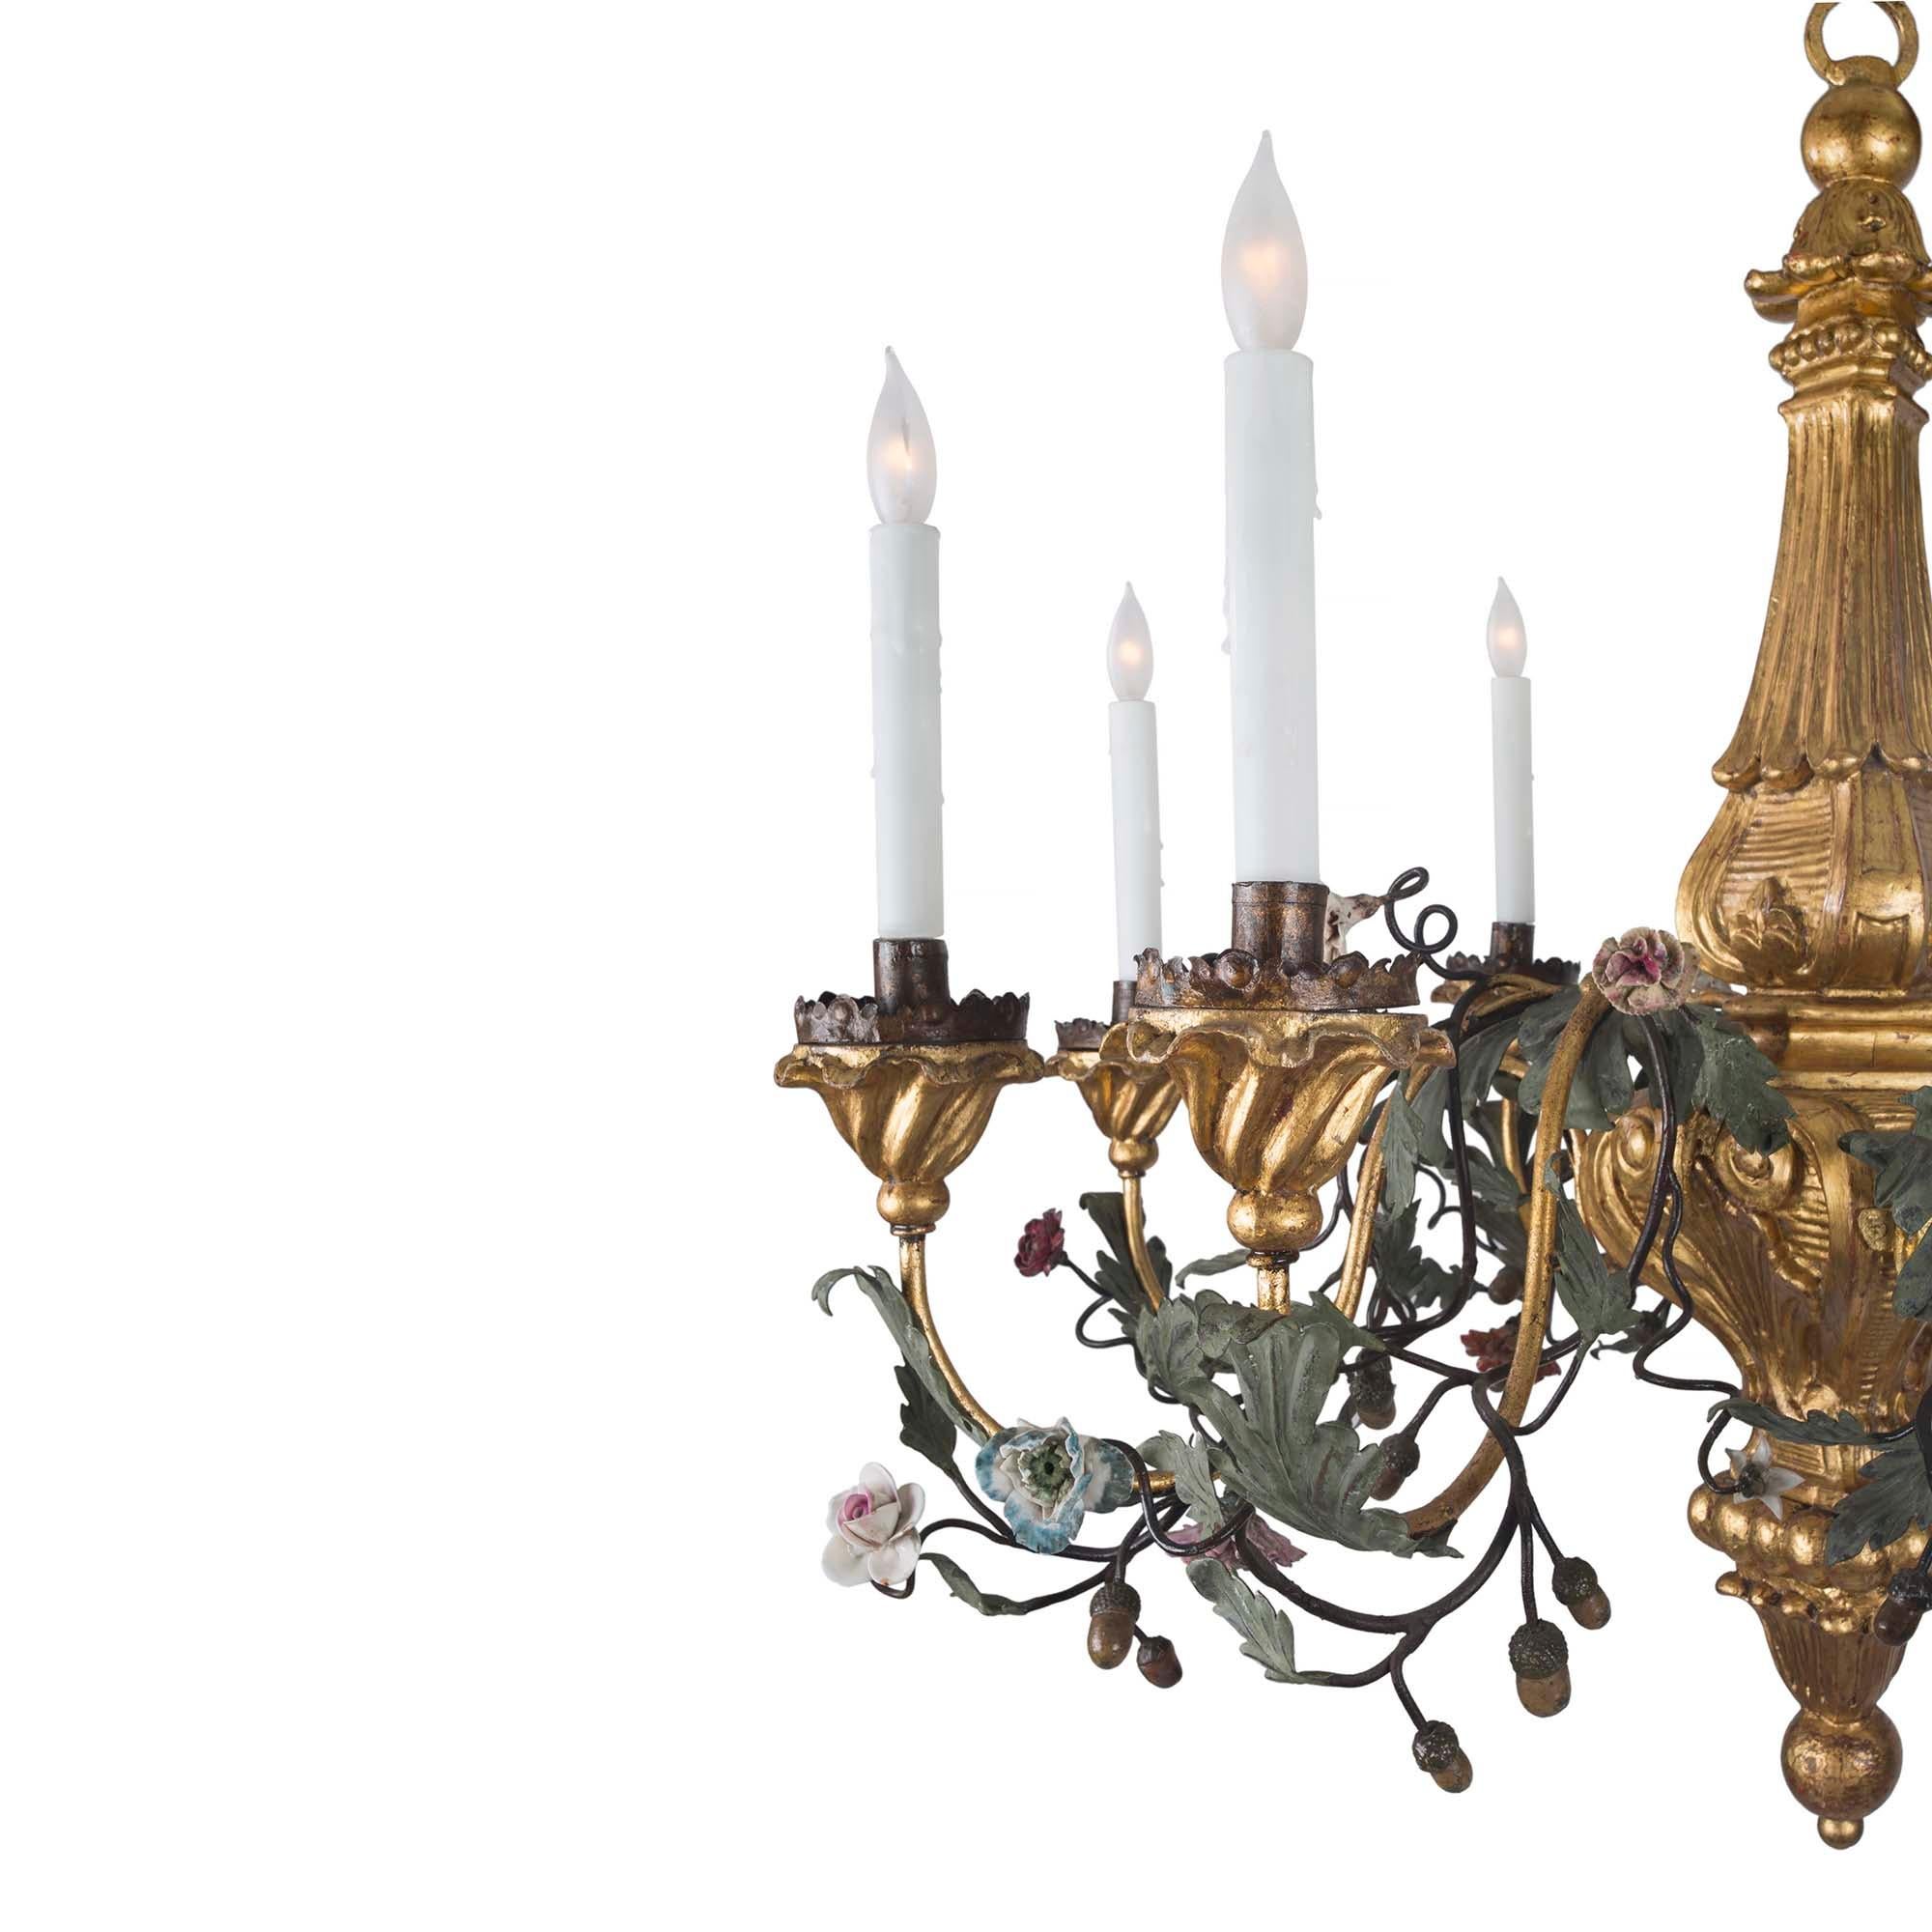 A whimsical and most charming Italian 19th-century giltwood, gilt metal and saxe porcelain eight light chandelier. The chandelier is centered by a fine giltwood ball finial below a foliate and reeded design. Beautiful scrolled movements lead up the